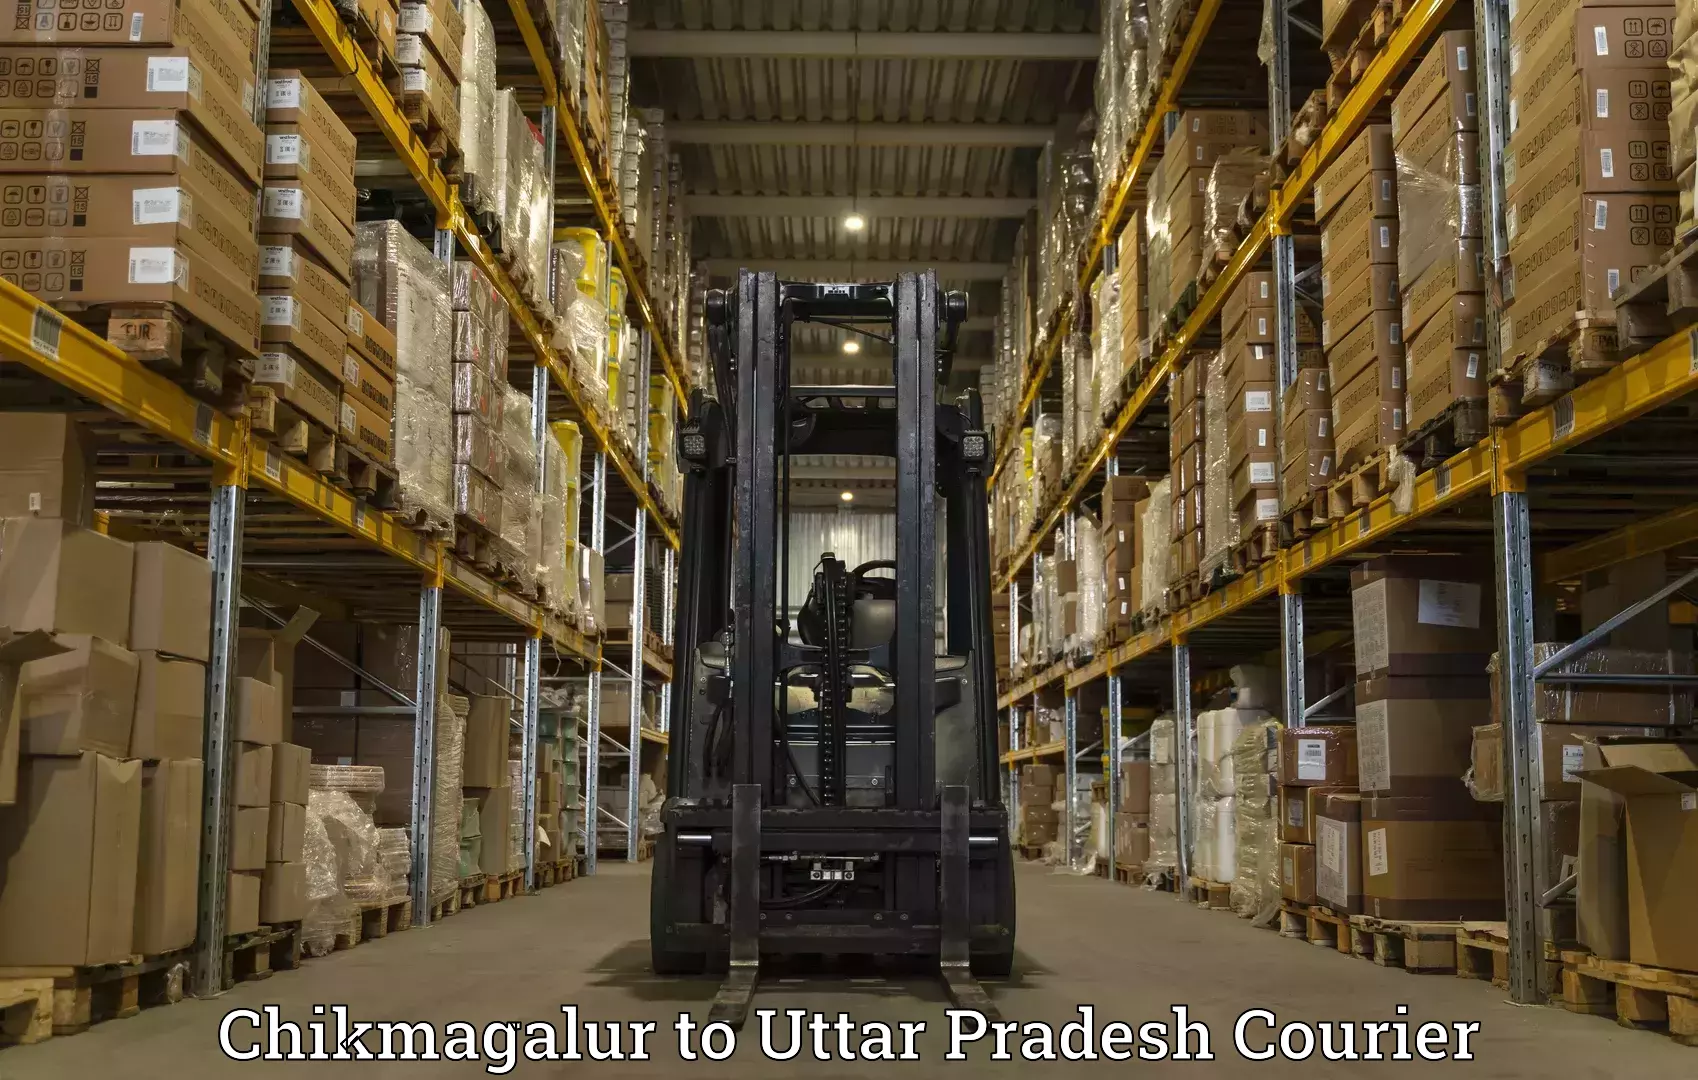 Multi-national courier services Chikmagalur to Tulsipur